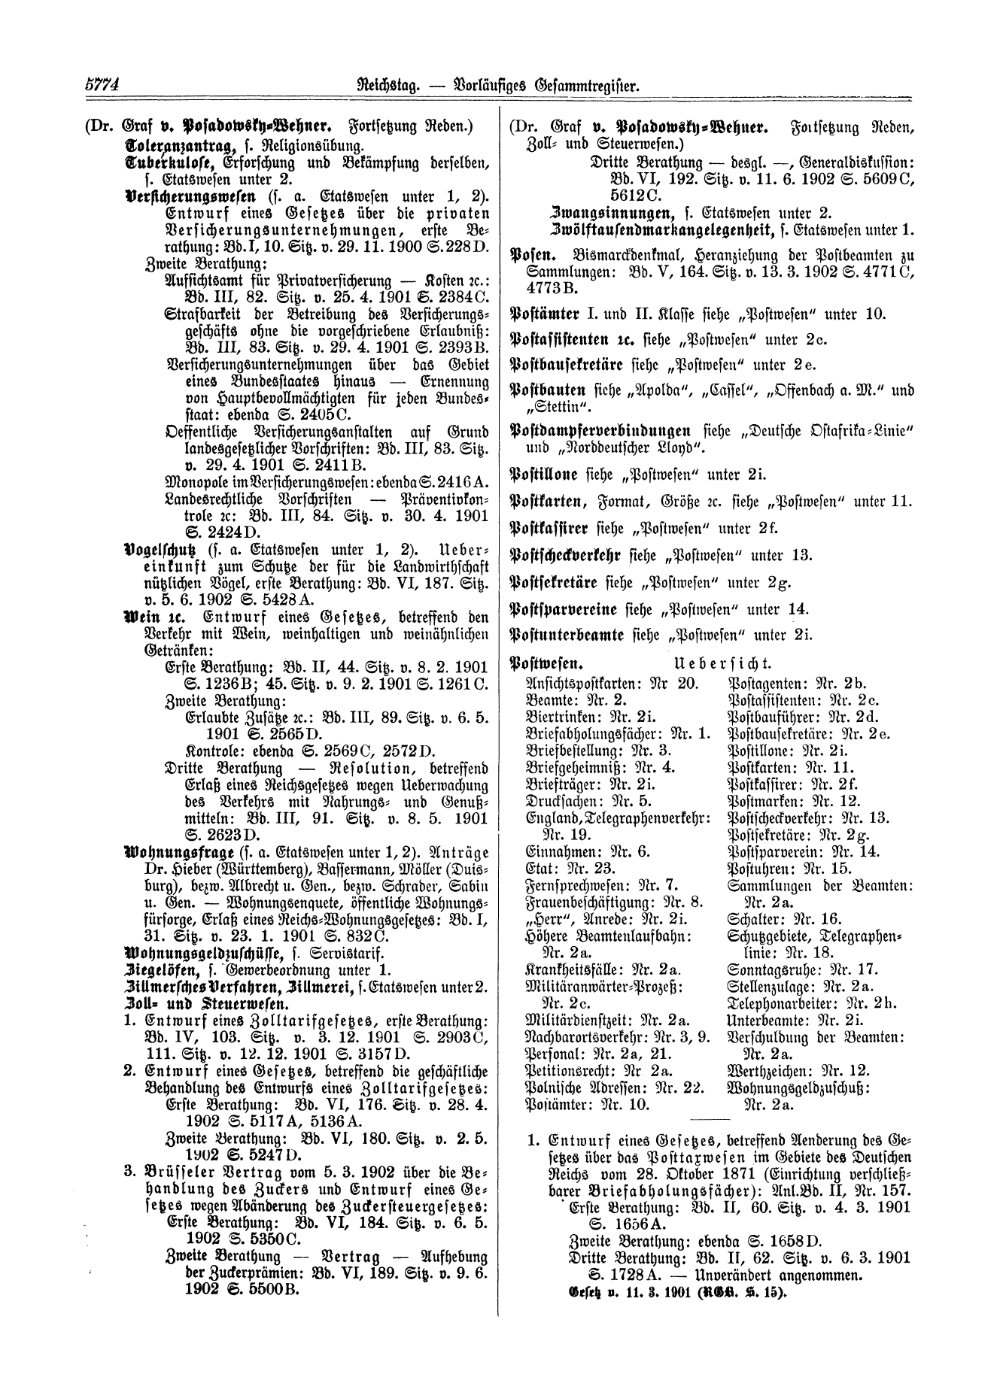 Scan of page 5774